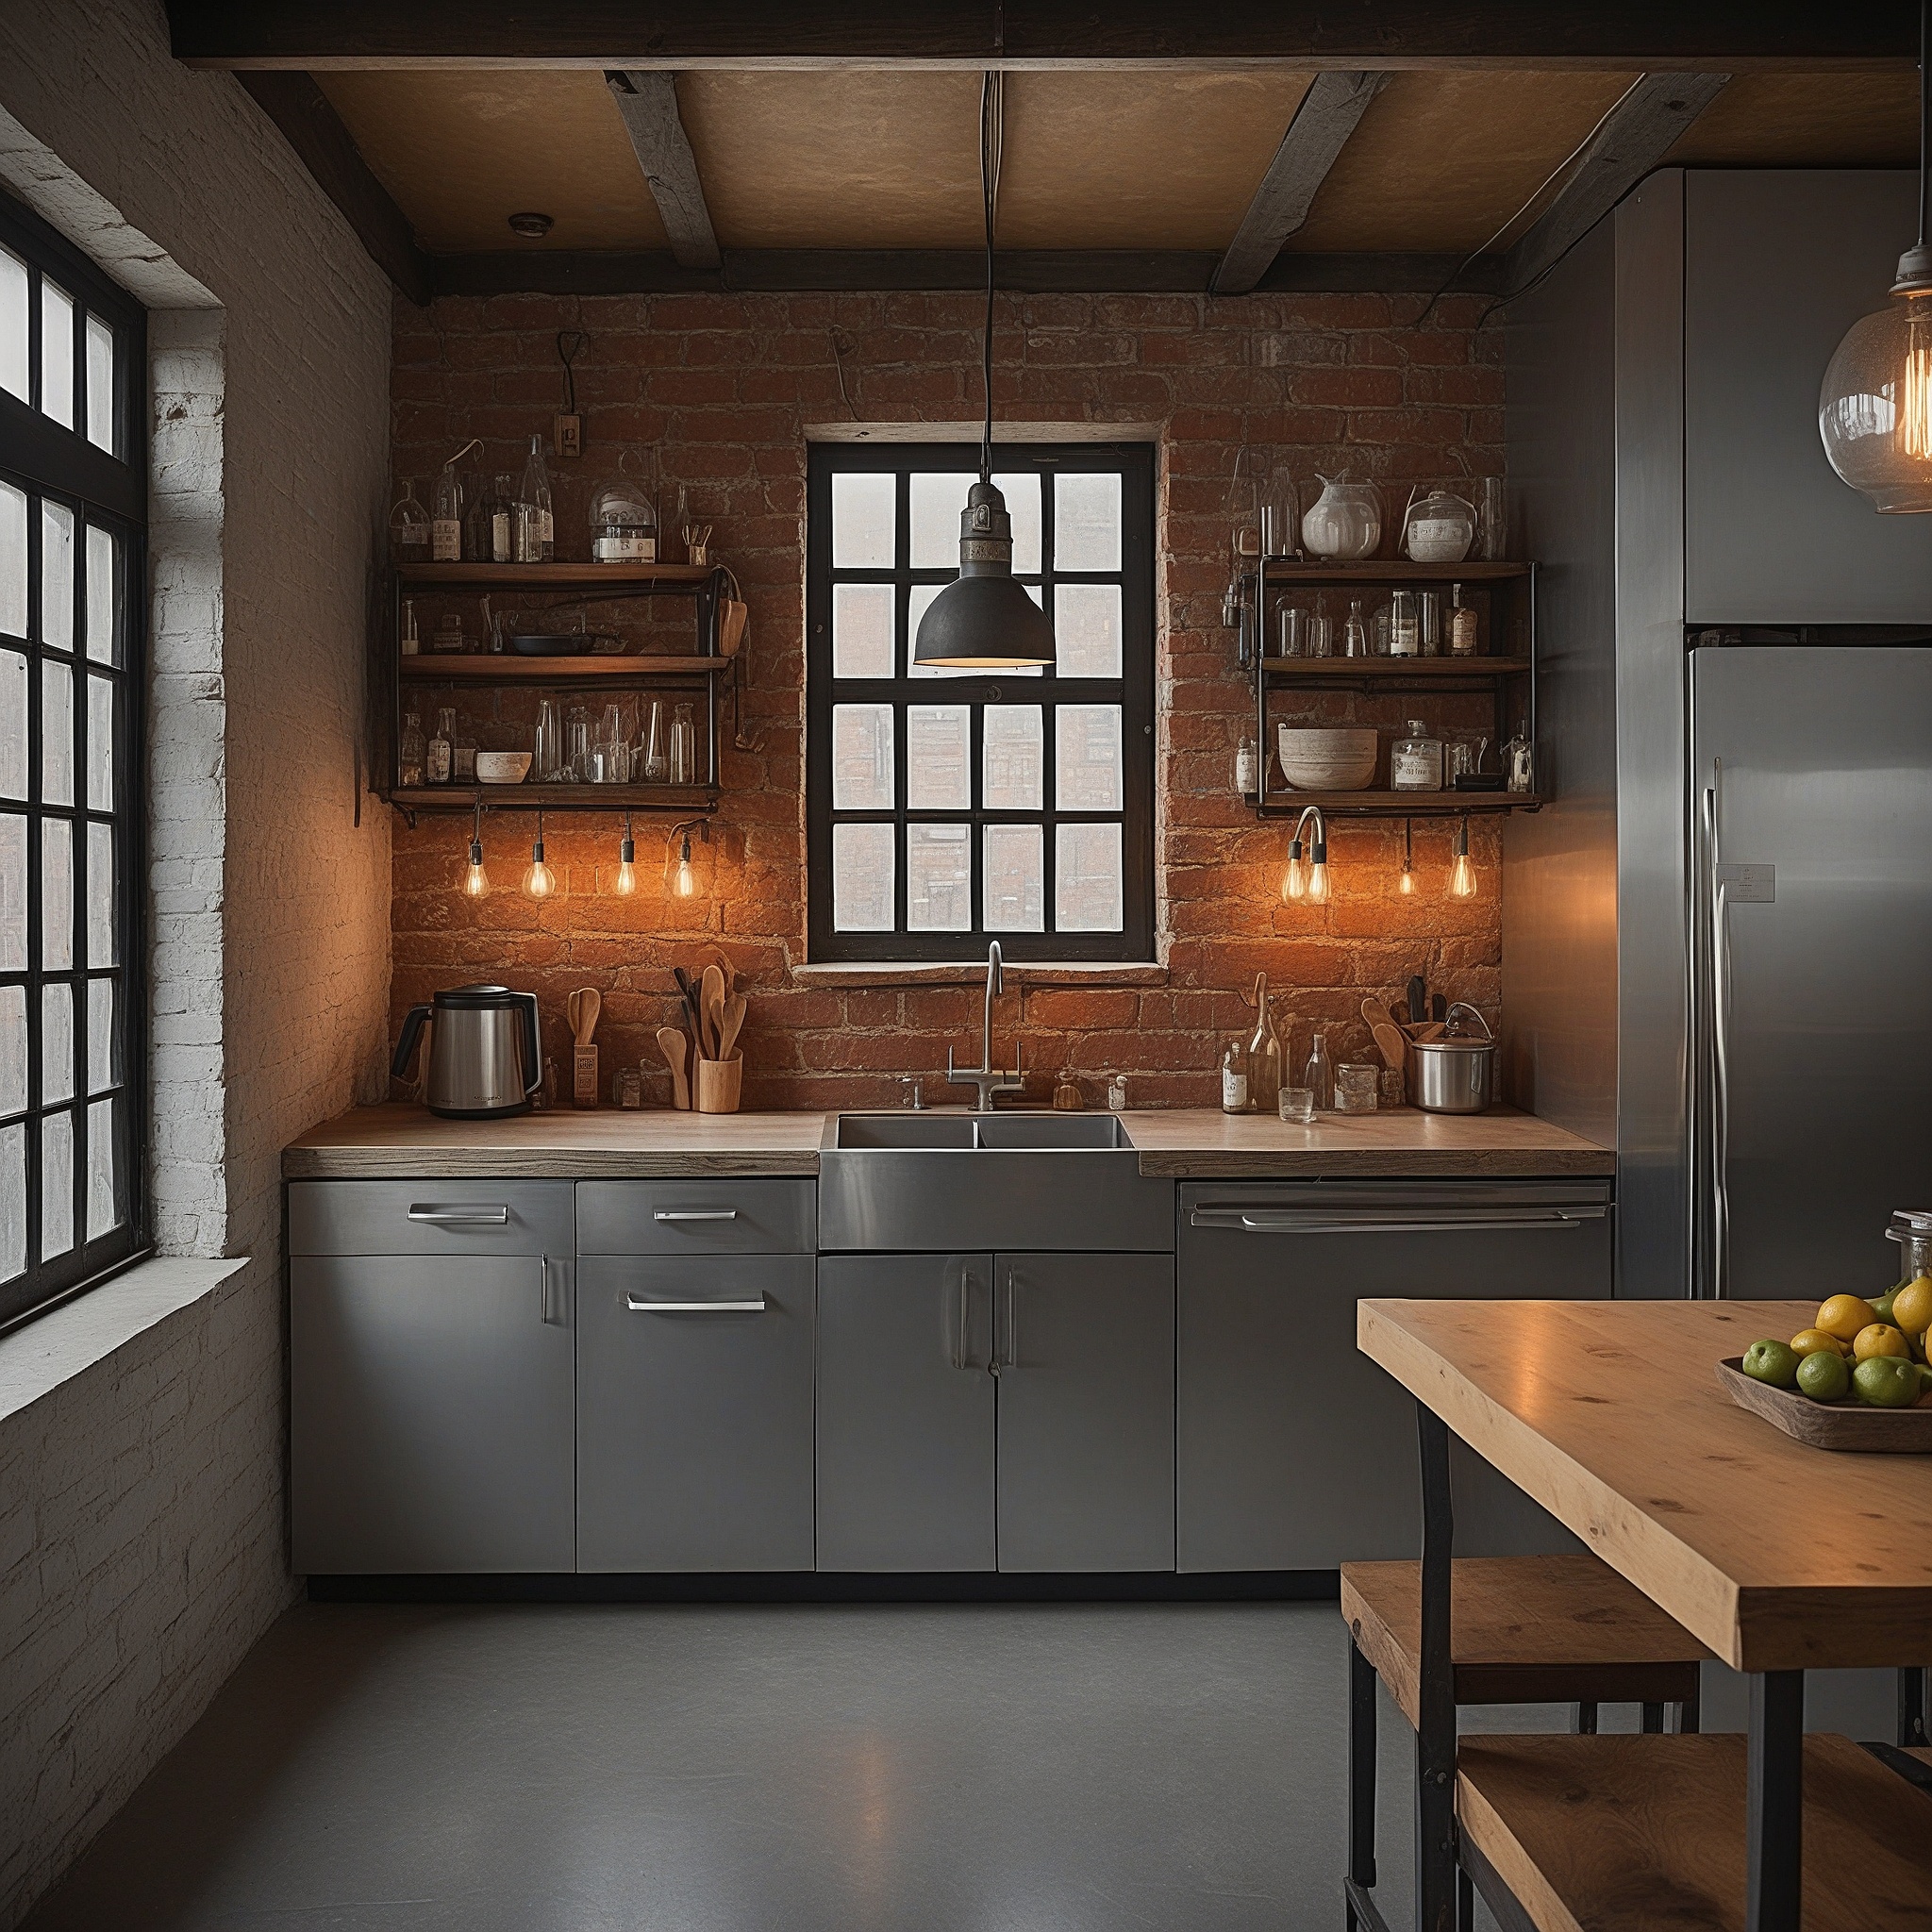 Industrial Apartment Kitchen Layout With Metal Cabinetry, Concrete Countertops